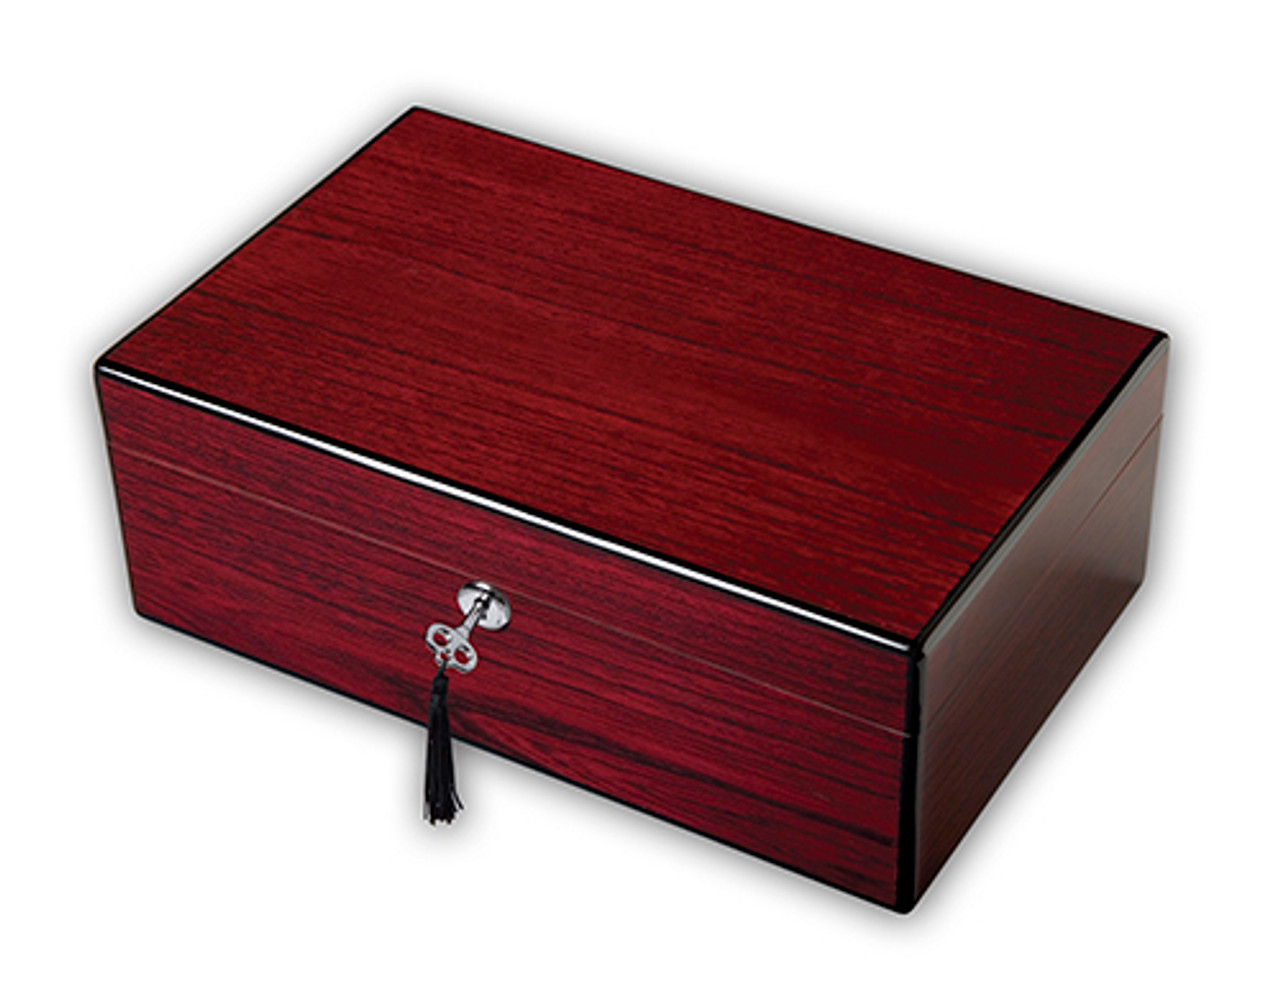 Diamond Crown Oxford 90 Humidors discount prices